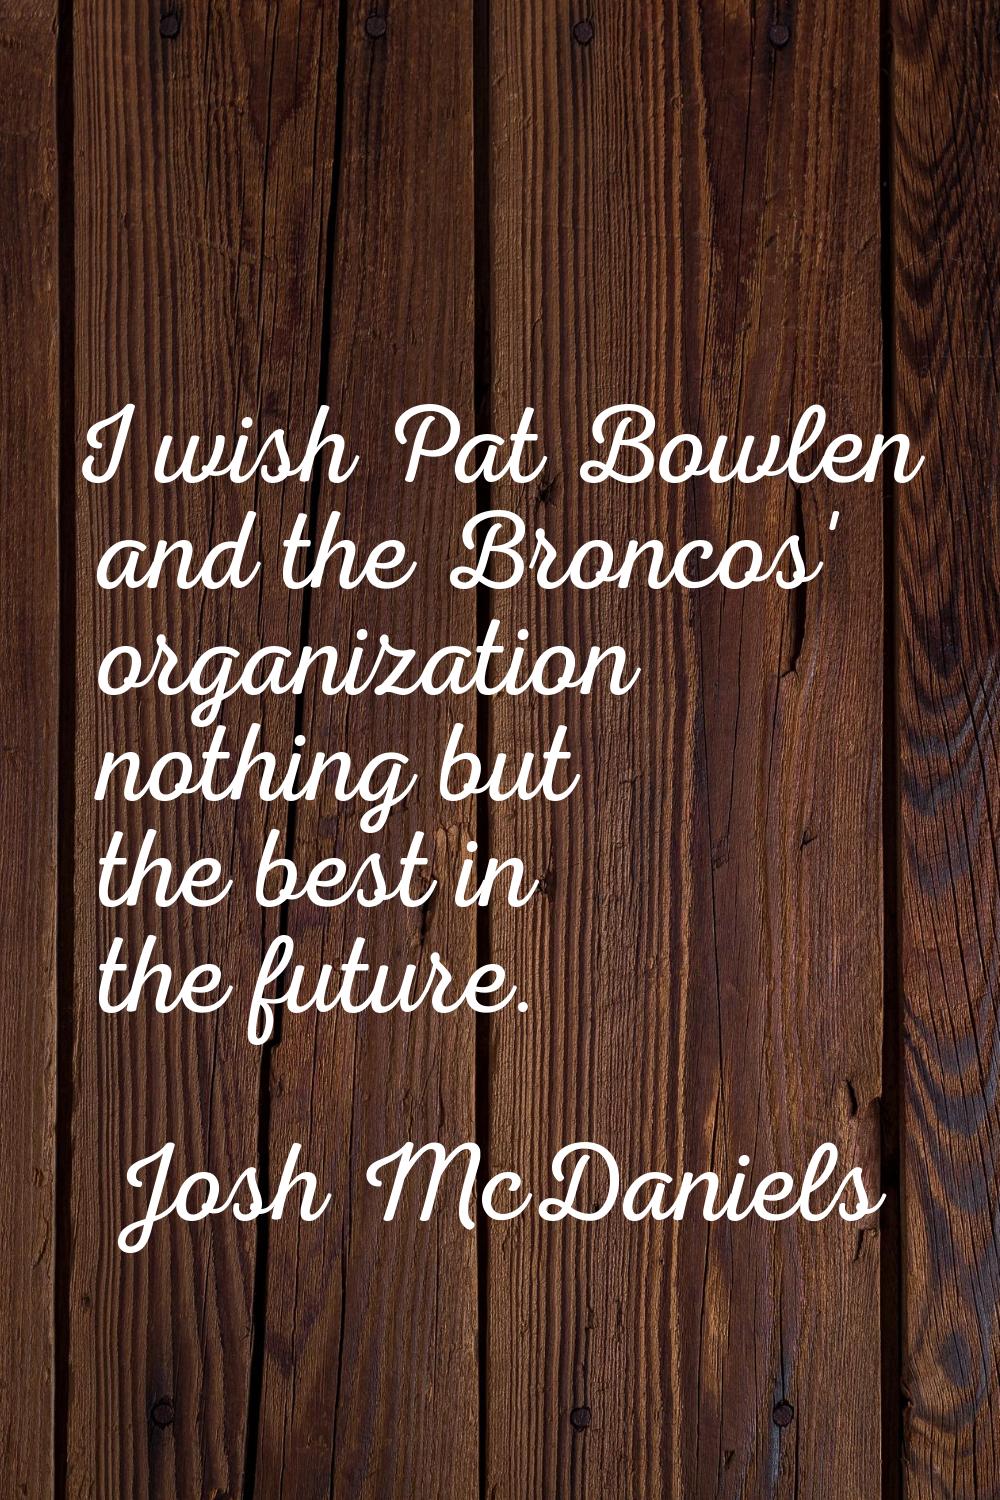 I wish Pat Bowlen and the Broncos' organization nothing but the best in the future.